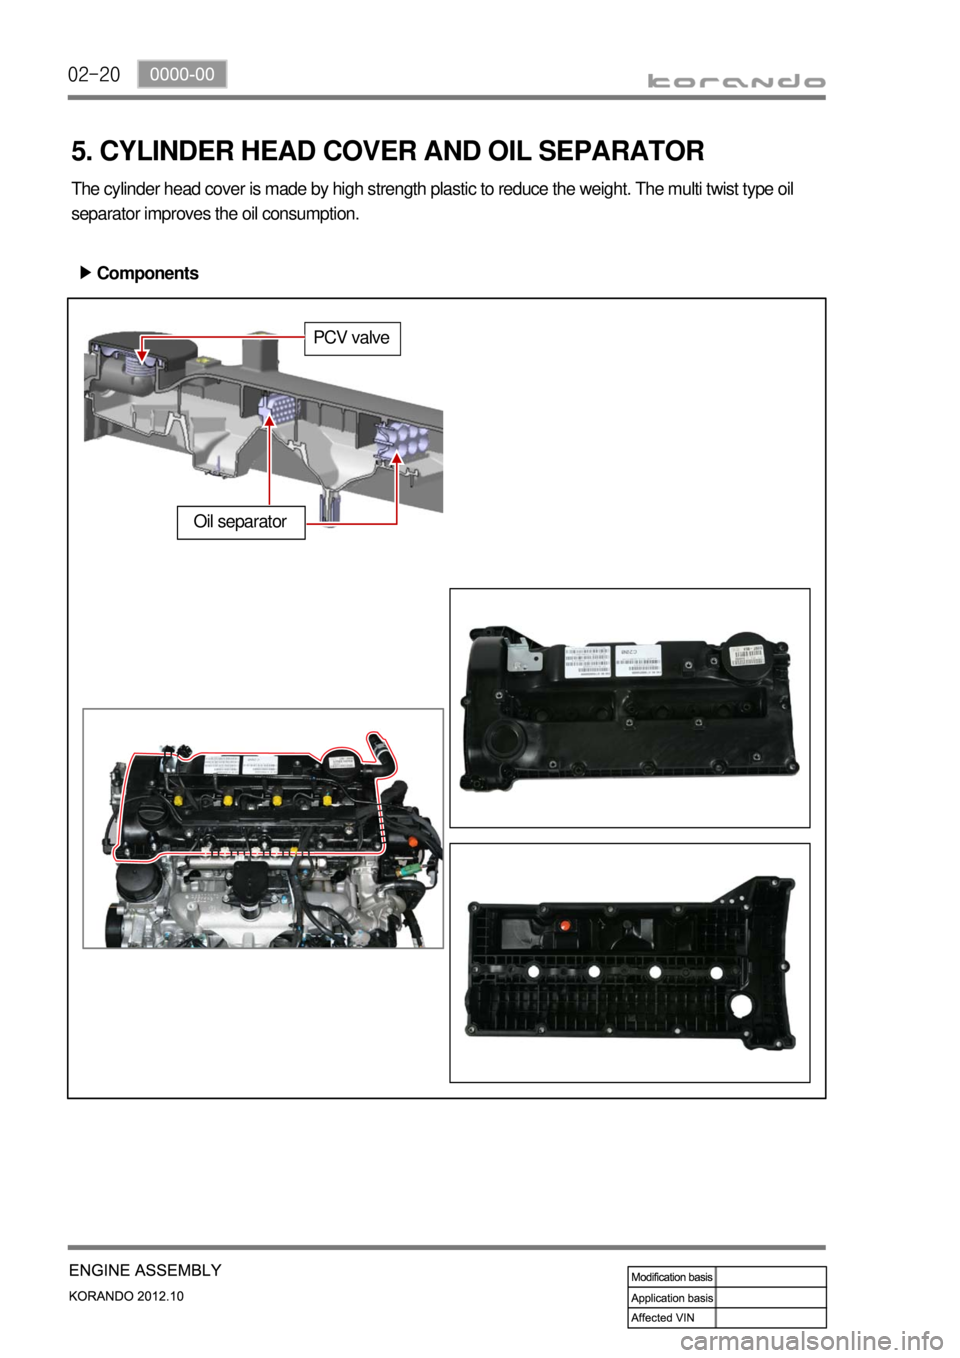 SSANGYONG KORANDO 2012  Service Manual 02-20
5. CYLINDER HEAD COVER AND OIL SEPARATOR
The cylinder head cover is made by high strength plastic to reduce the weight. The multi twist type oil 
separator improves the oil consumption.
Componen